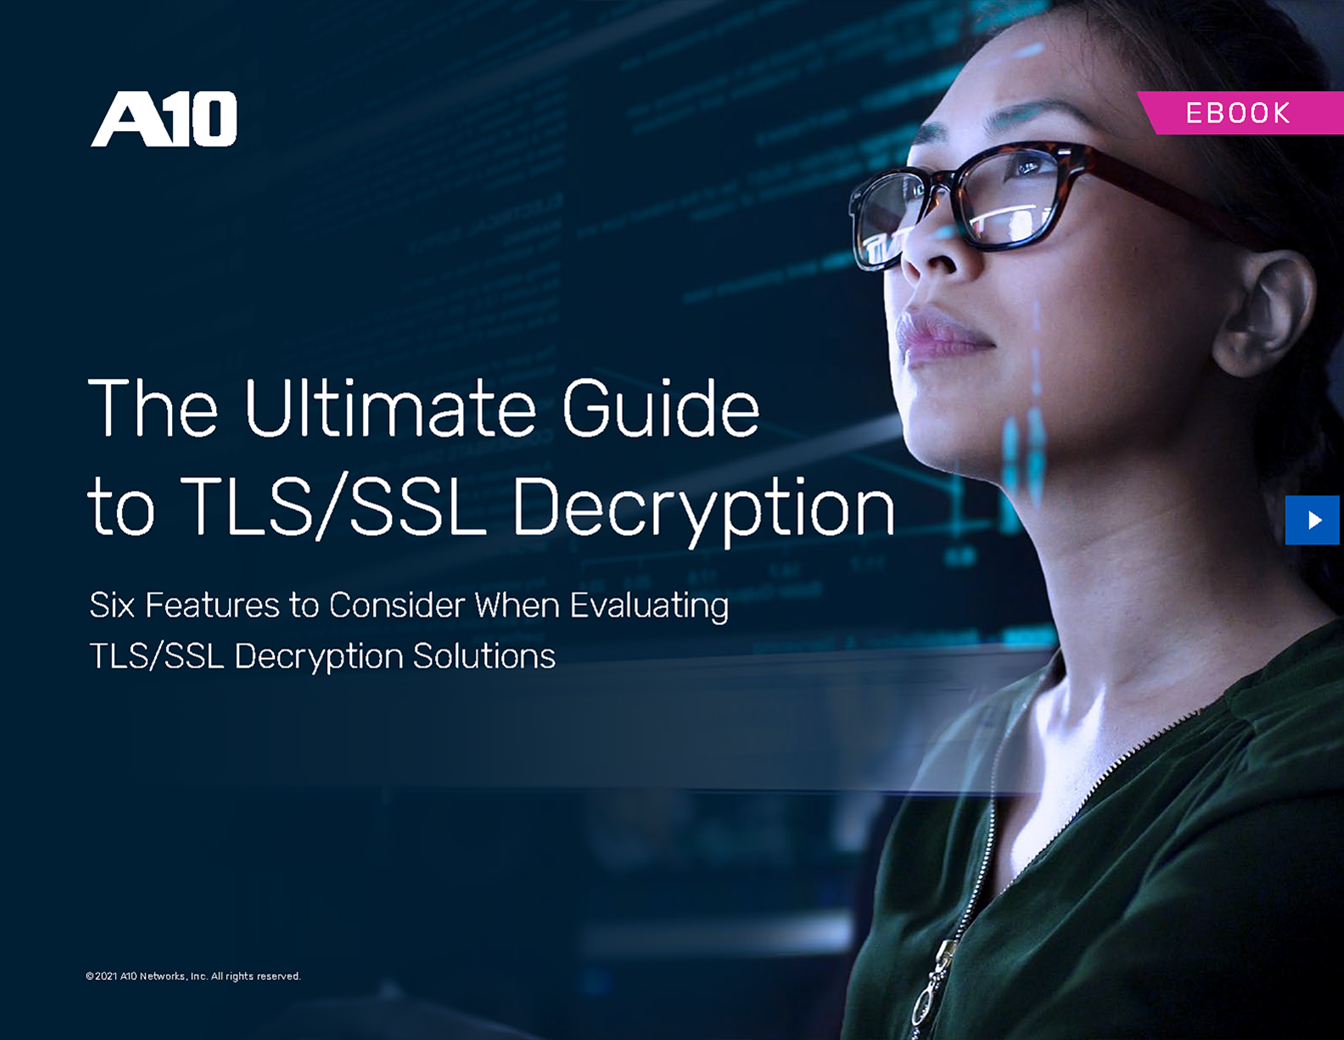 The Ultimate Guide to TLS/SSL Decryption ebook cover, with text that reads: The Ultimate Guide to TLS/SSL Decryption, Six features to consider when evaluating TLS/SSL decryption solutions